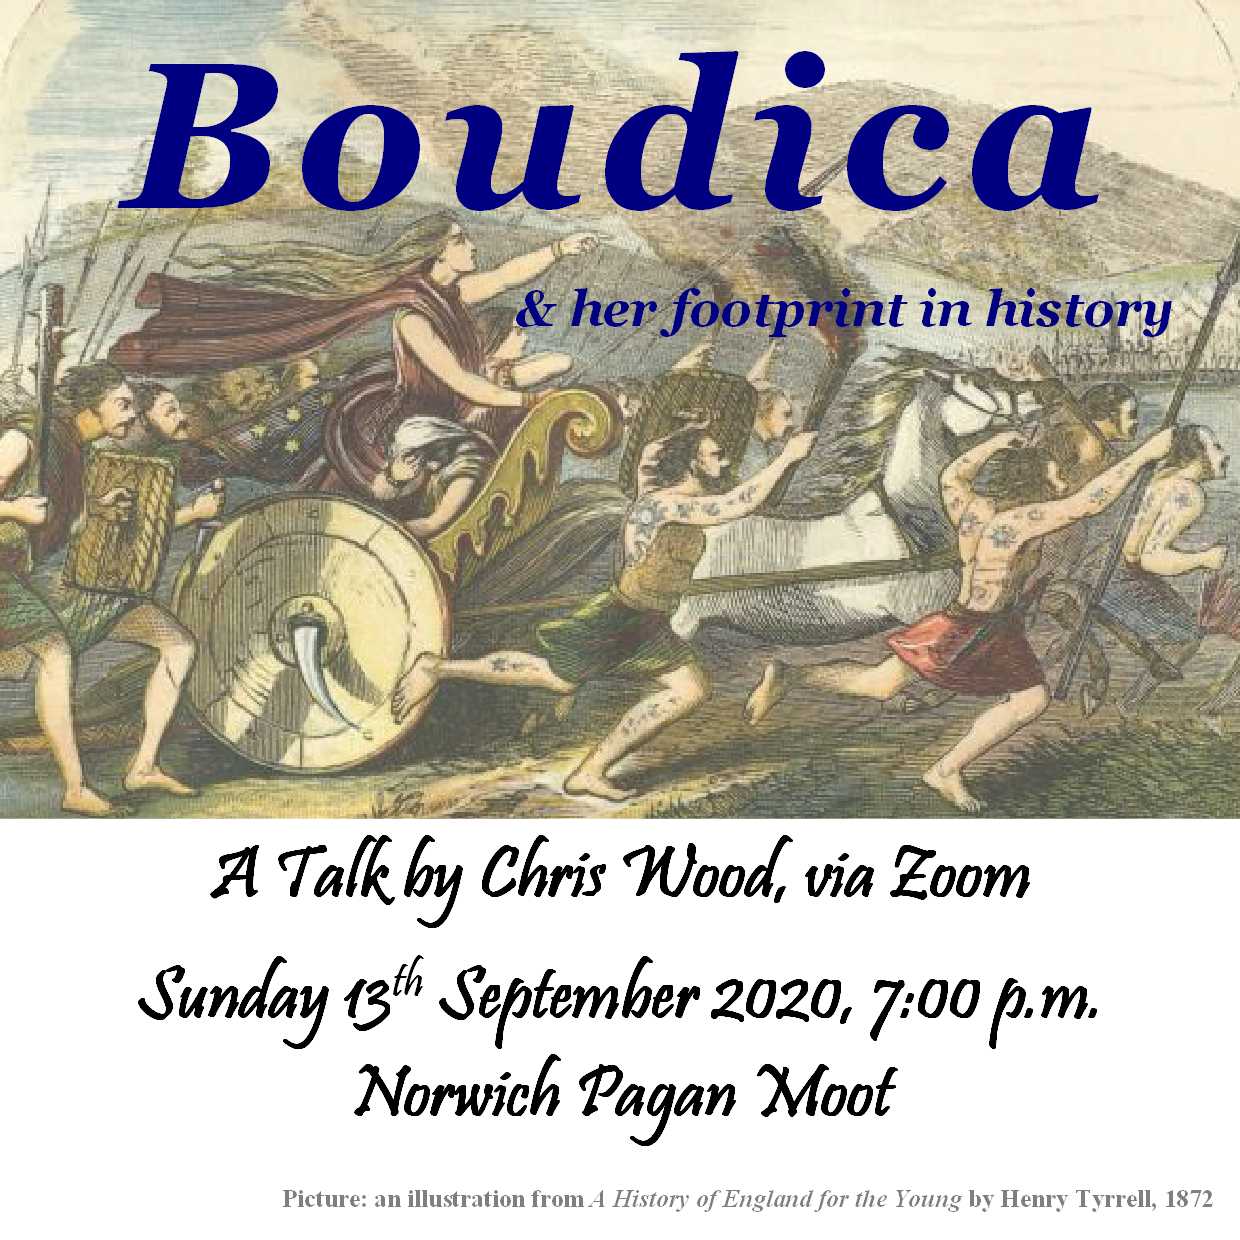 Advert for Chris Wood's Boudica talk from September 2020 forming a link to an article by Chris covering the same ground.